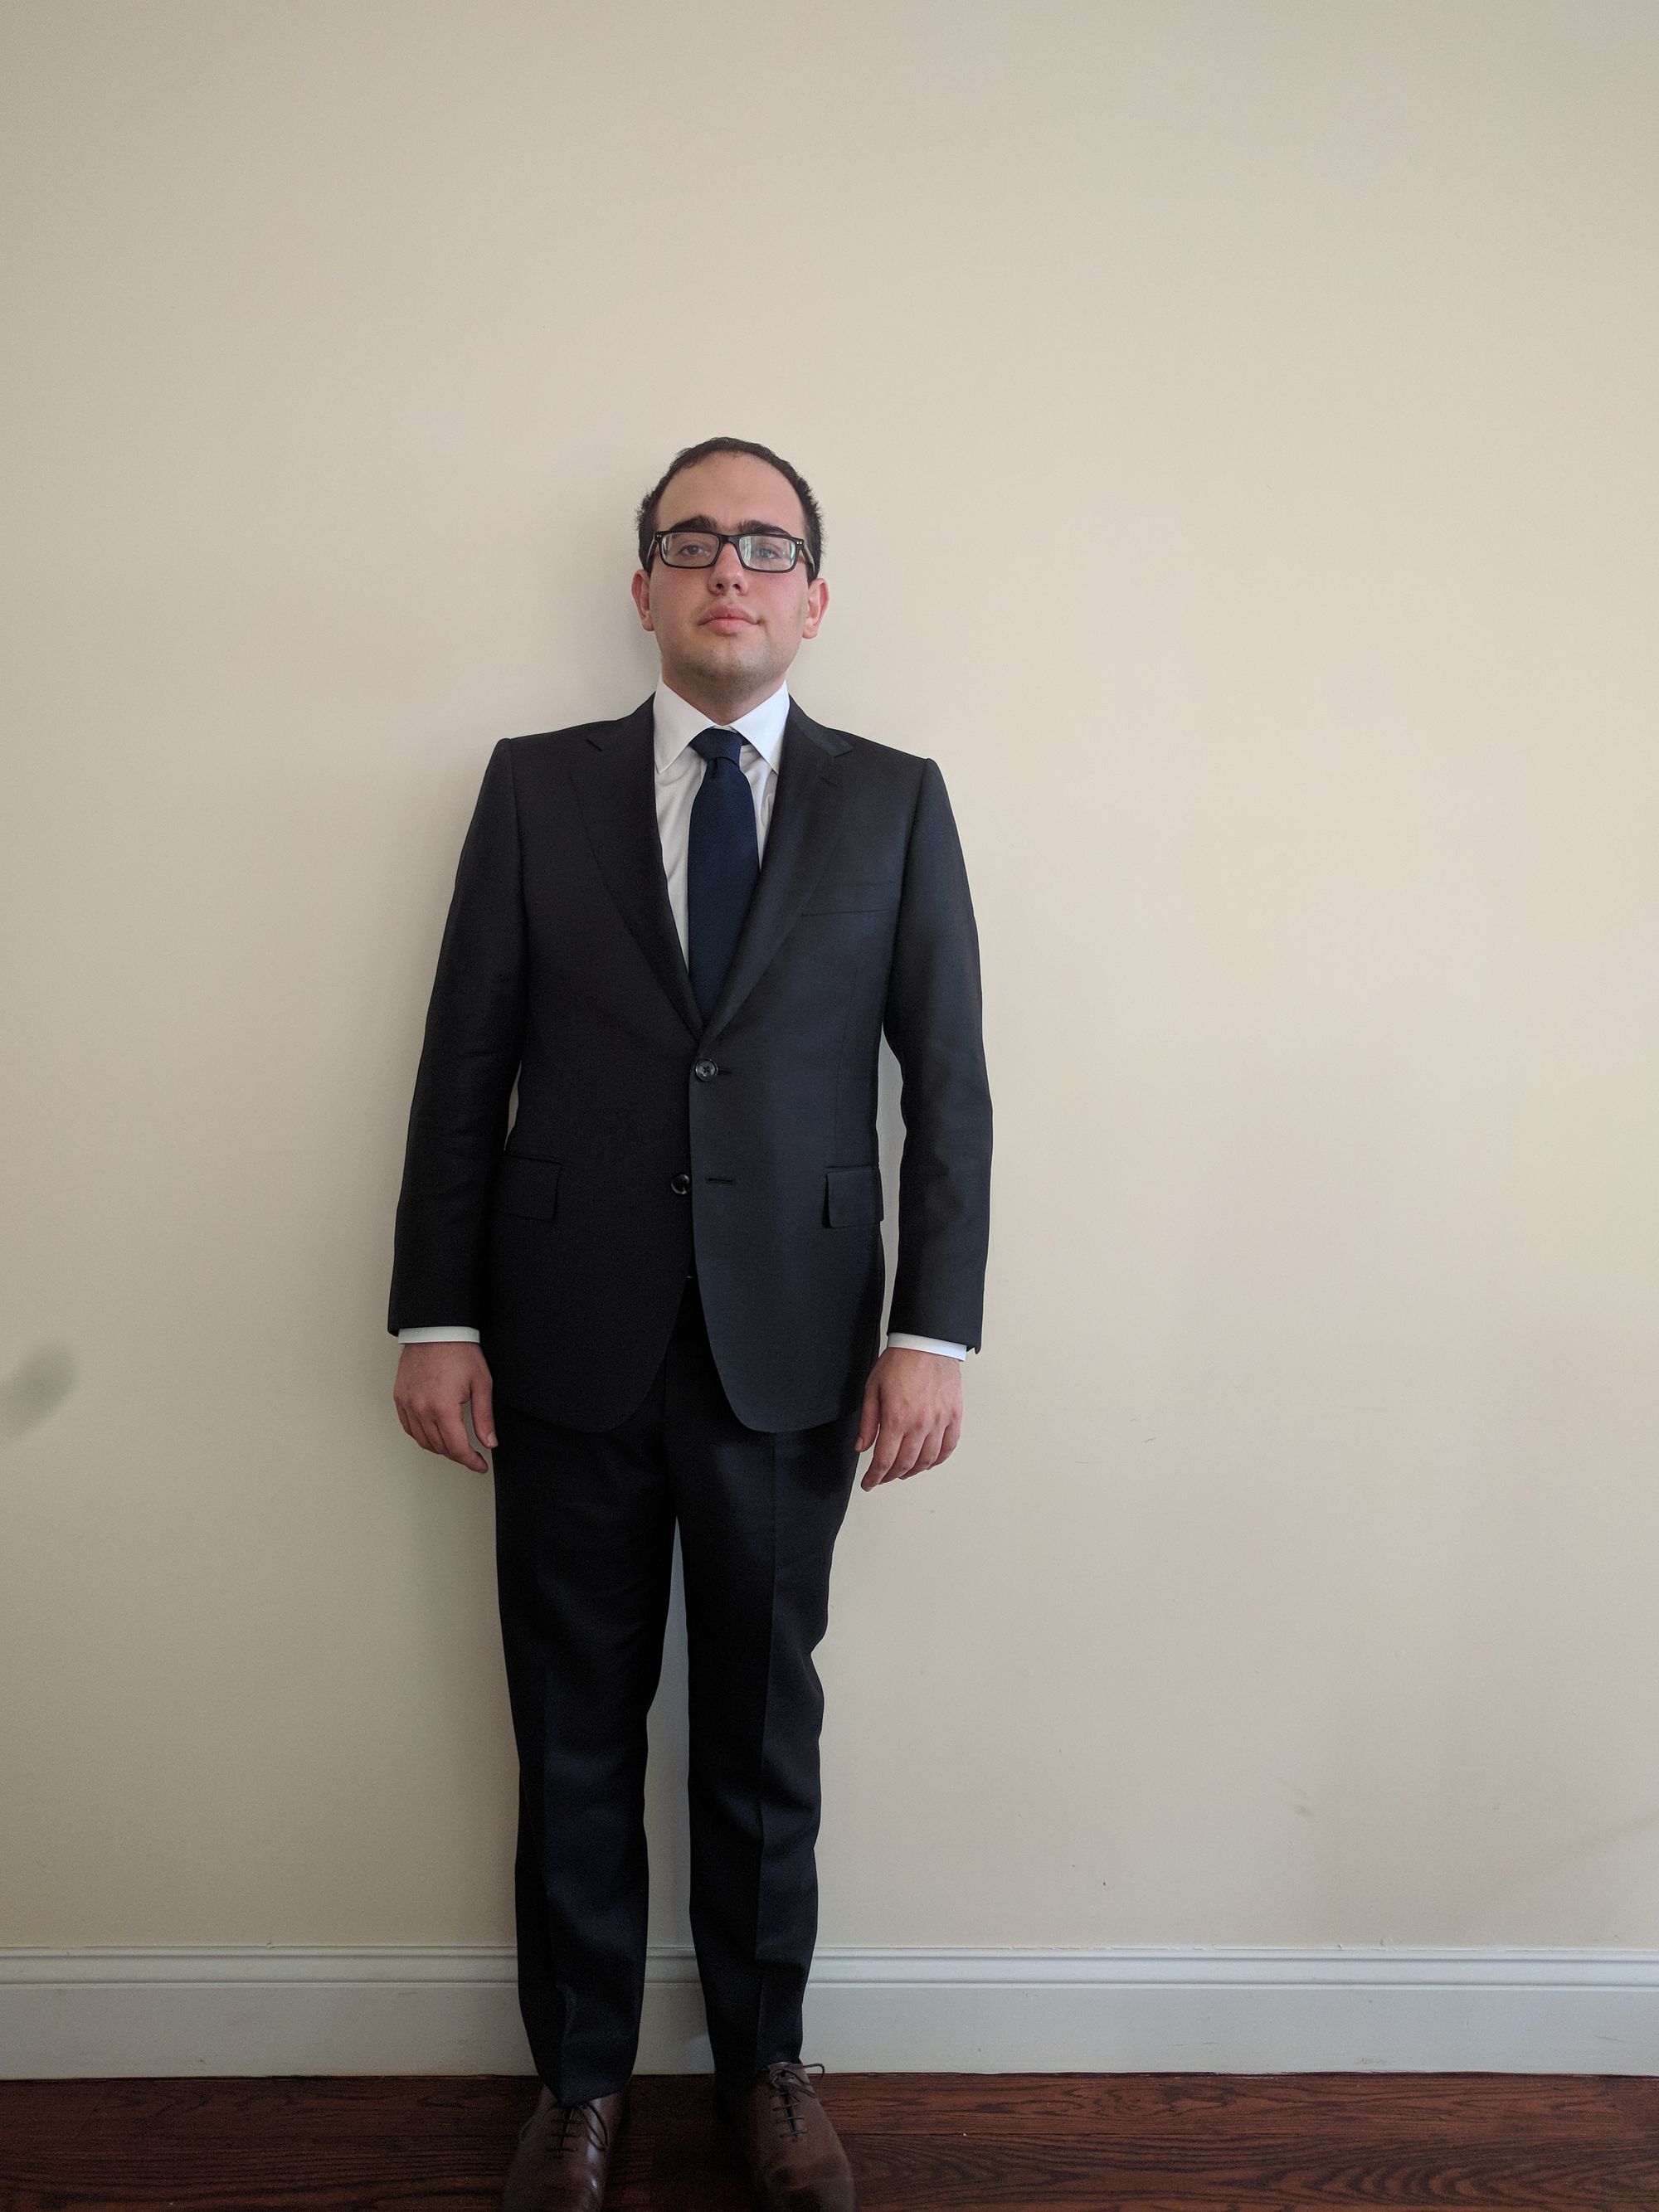 Black Lapel Suit Review (2023): Made-to-Measure Experience